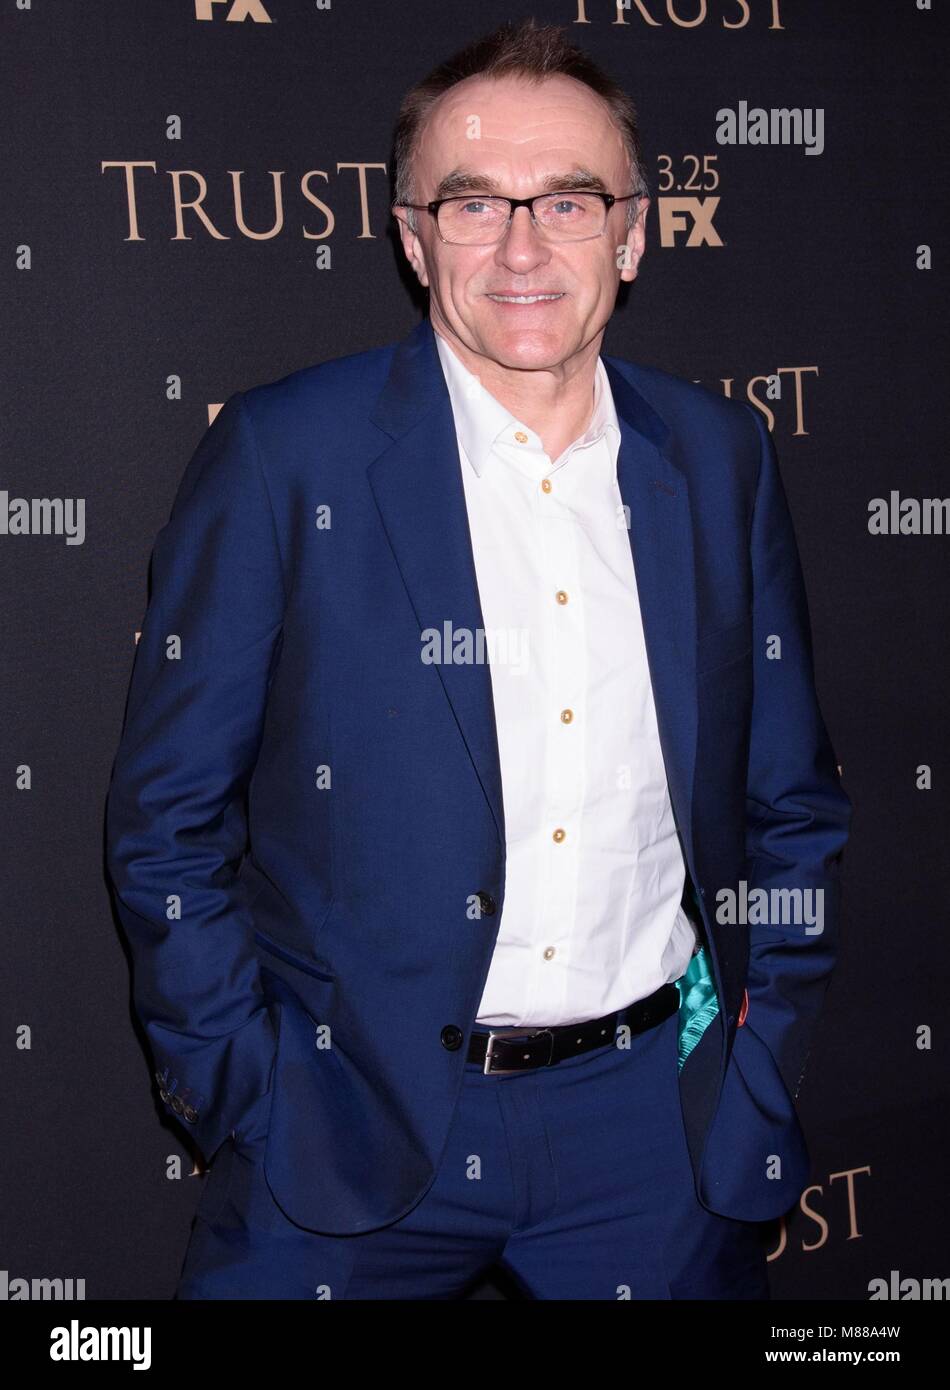 New York, NY, USA. 15th Mar, 2018. Danny Boyle at arrivals for The FX Annual All-Star Party Red Carpet Event, The School of Visual Arts (SVA) Theatre, New York, NY March 15, 2018. Credit: RCF/Everett Collection/Alamy Live News Stock Photo